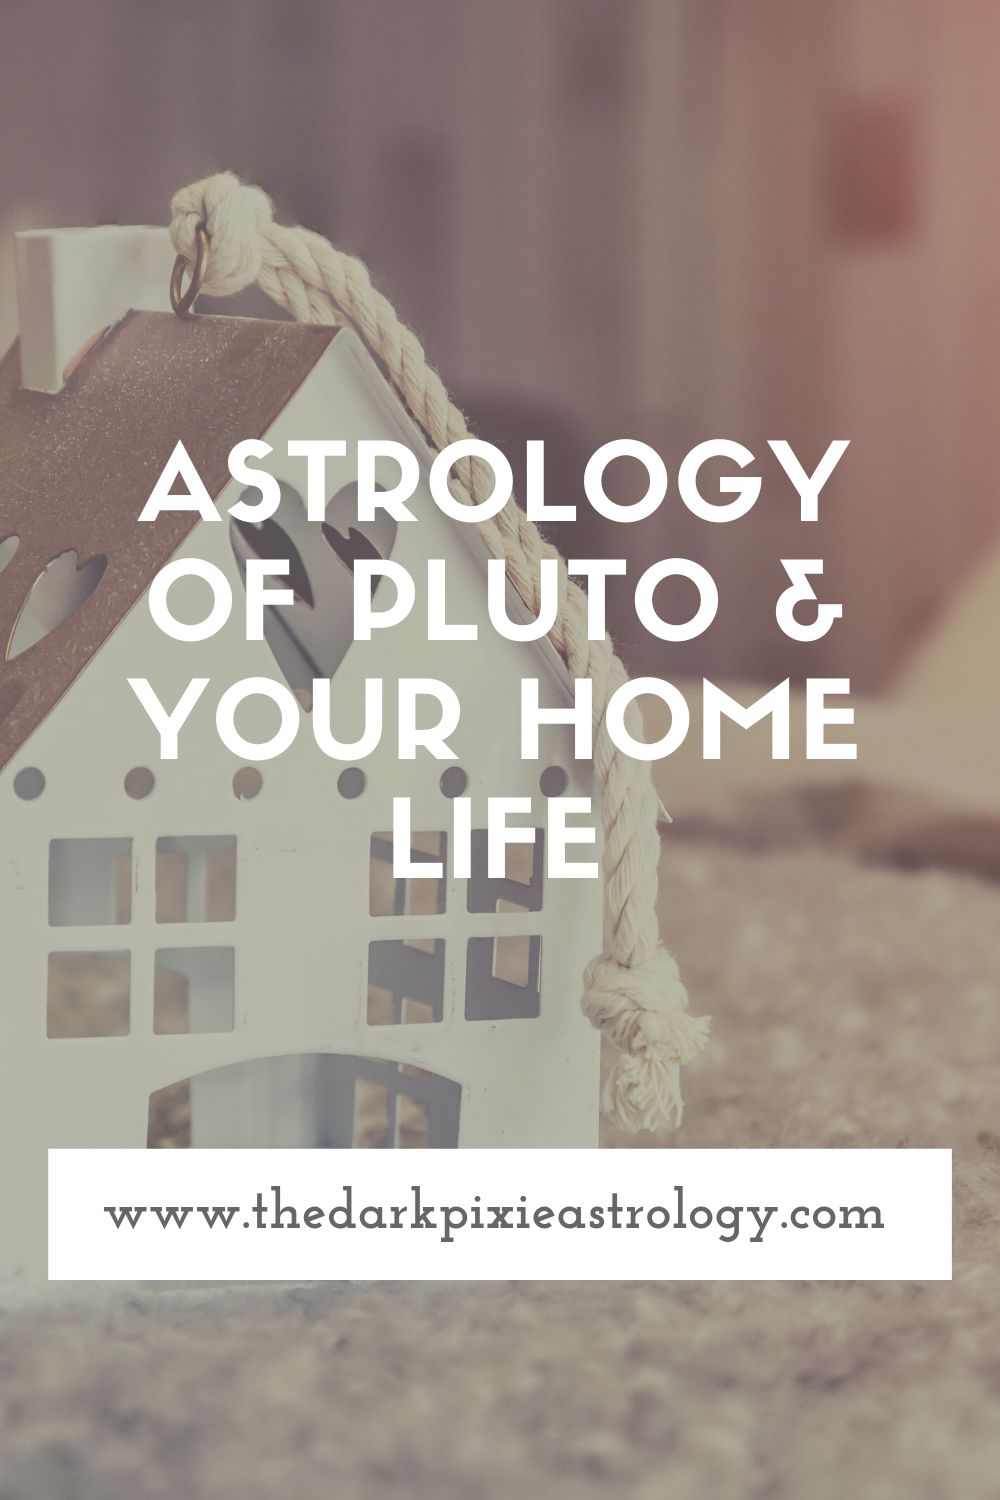 Astrology of Pluto & Your Home Life - The Dark Pixie Astrology